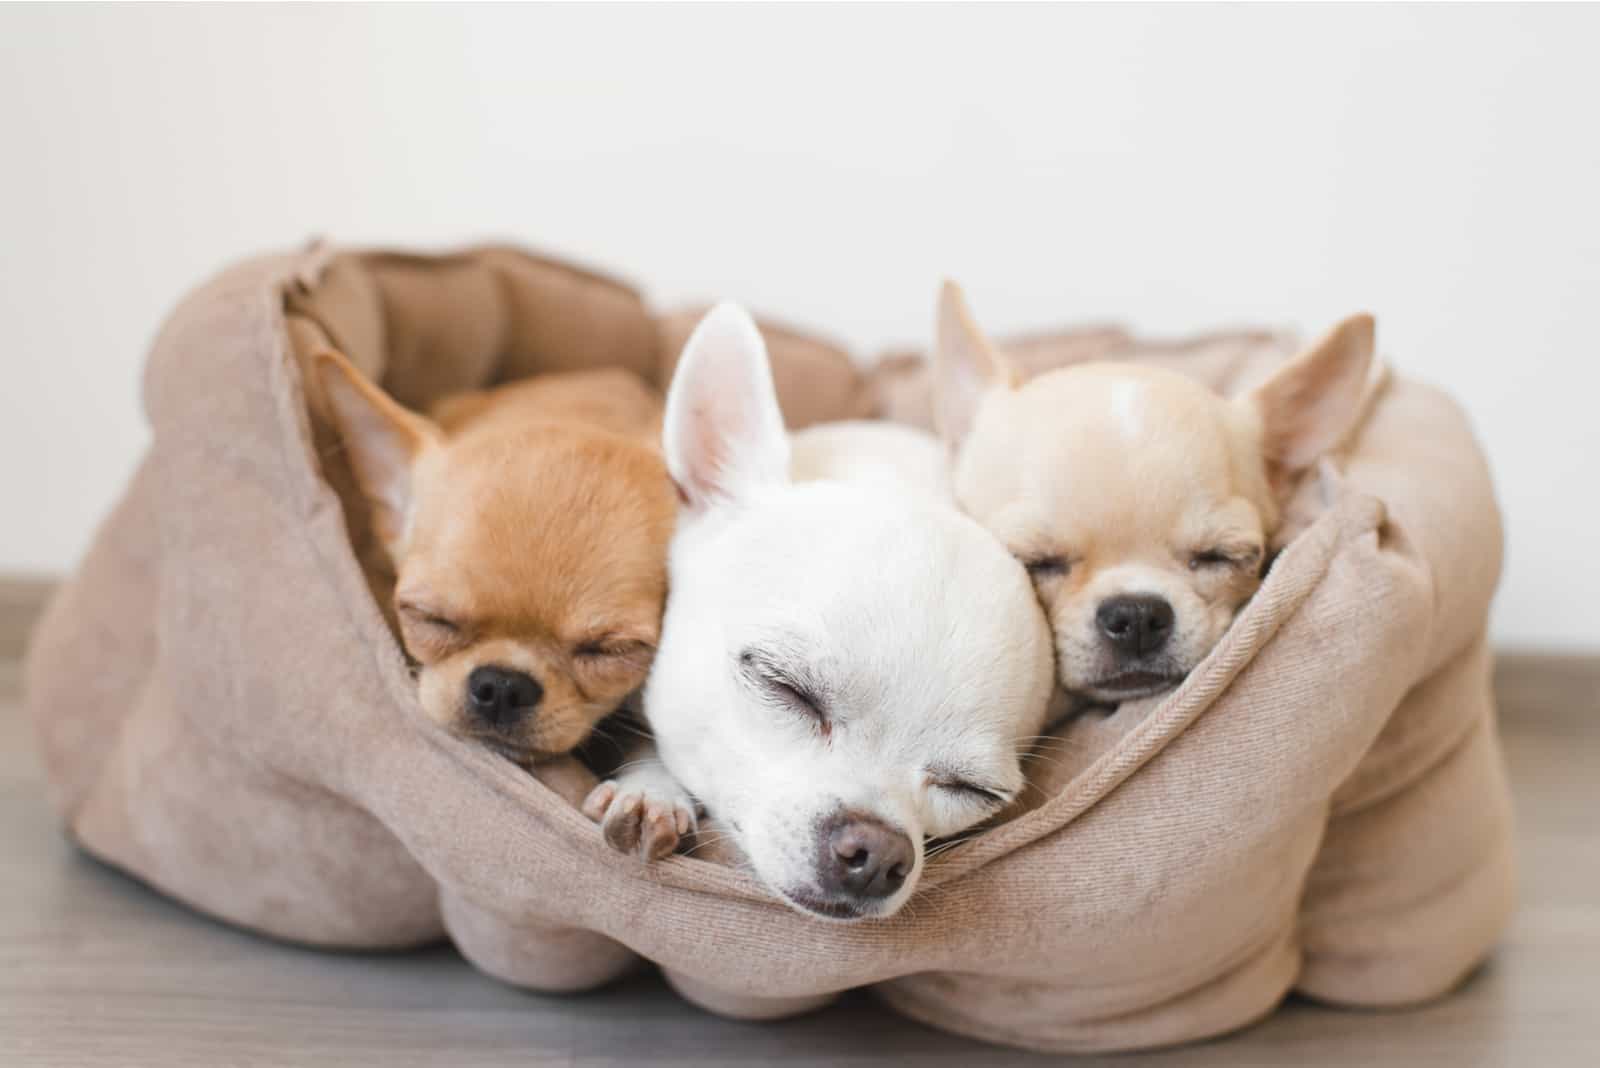 Chihuahua puppies sleeping in bed